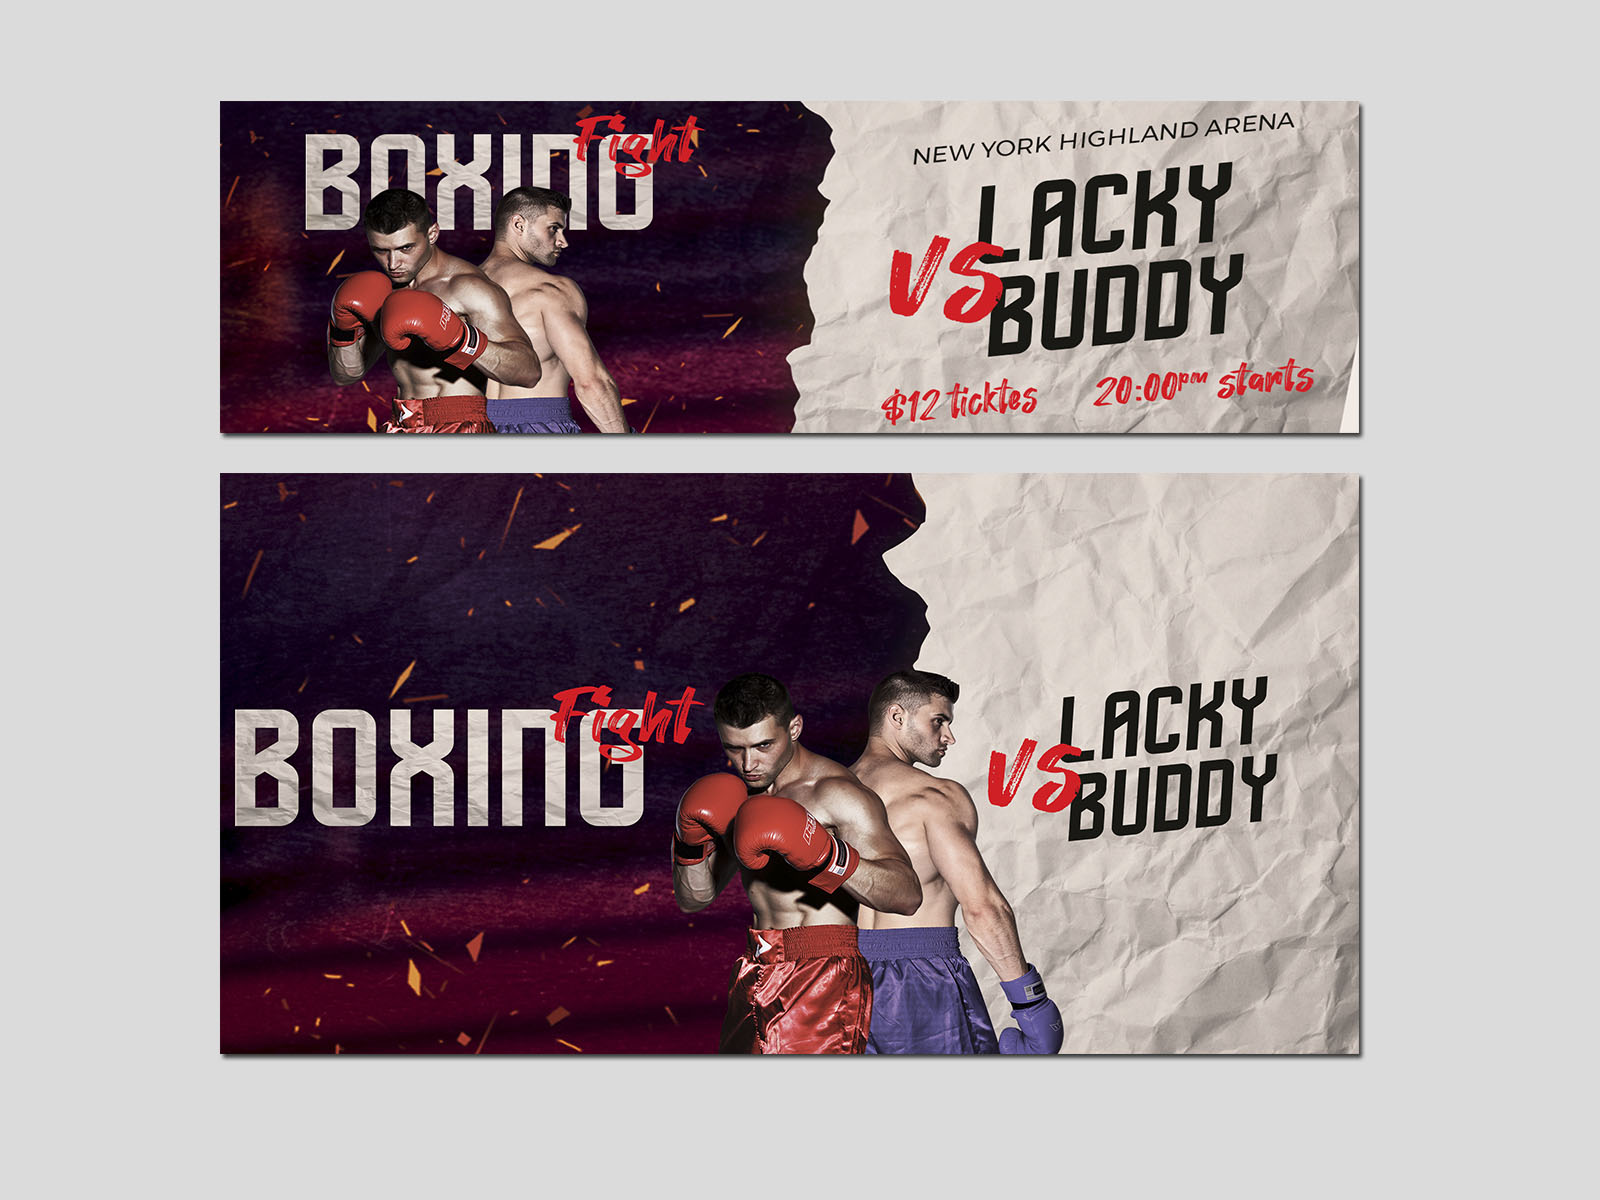 Free Boxing Twitter and Youtube templates by elegantflyer on Dribbble